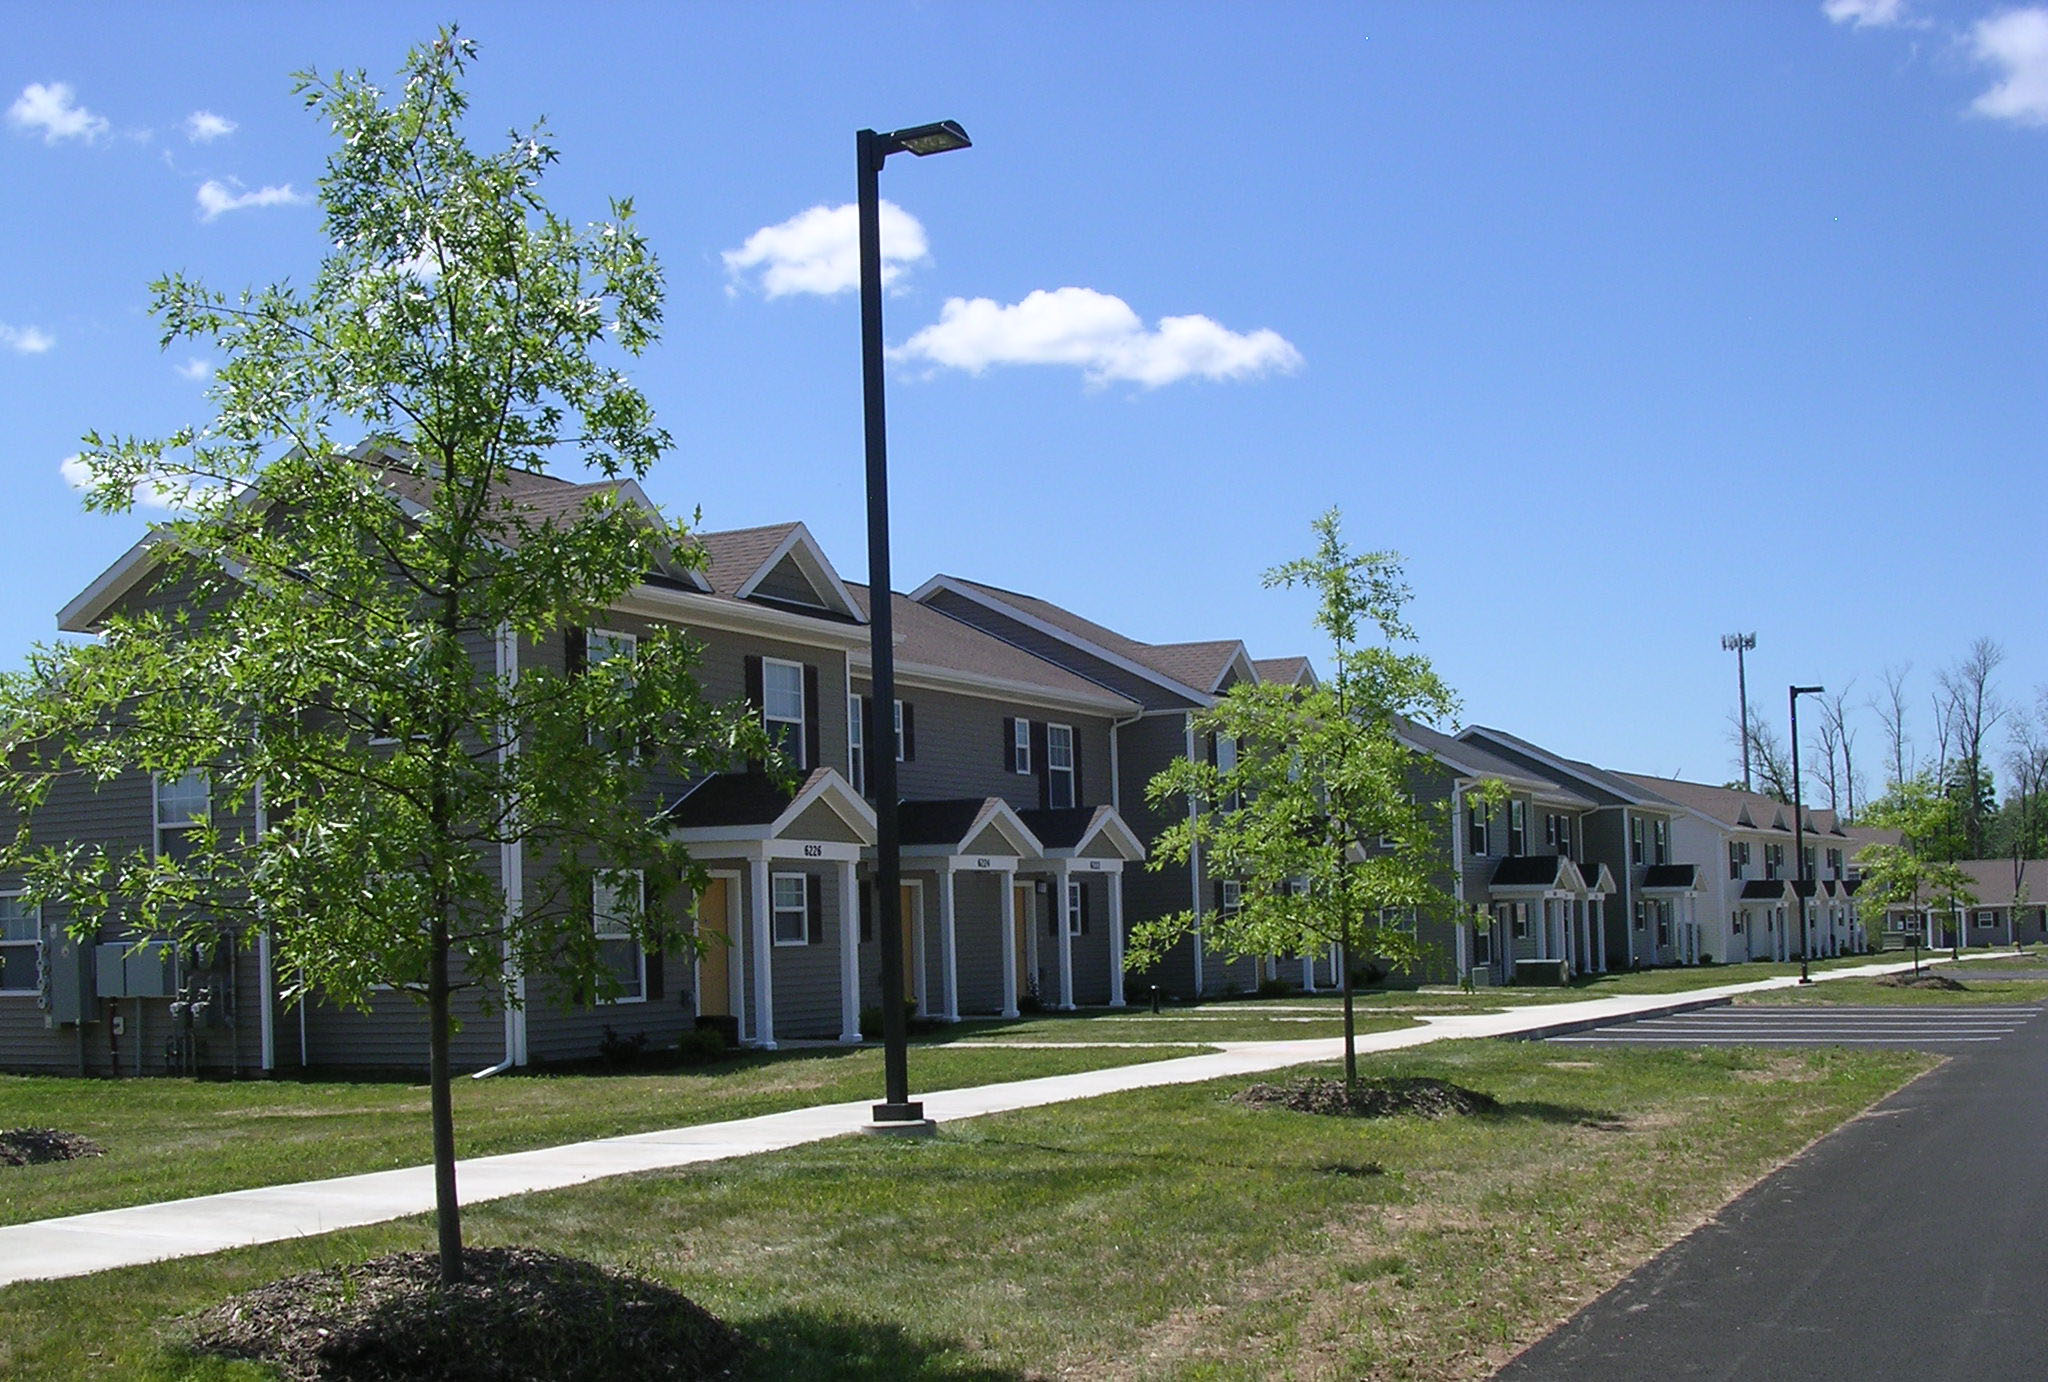 property management company client list syracuse ny street view image of island hollow townhomes